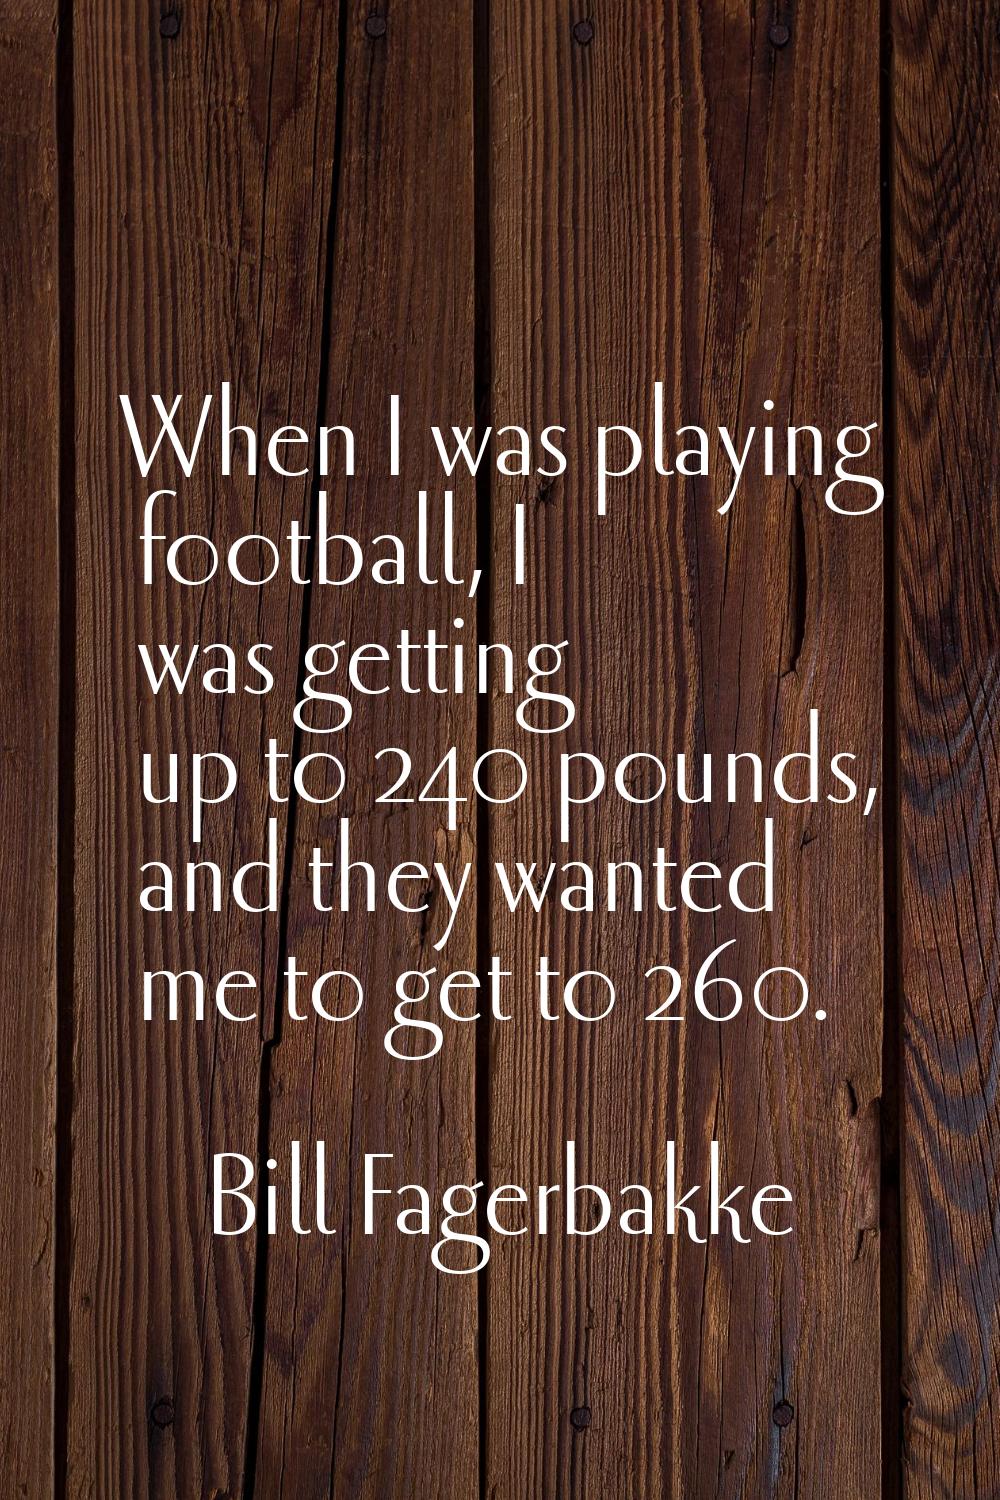 When I was playing football, I was getting up to 240 pounds, and they wanted me to get to 260.